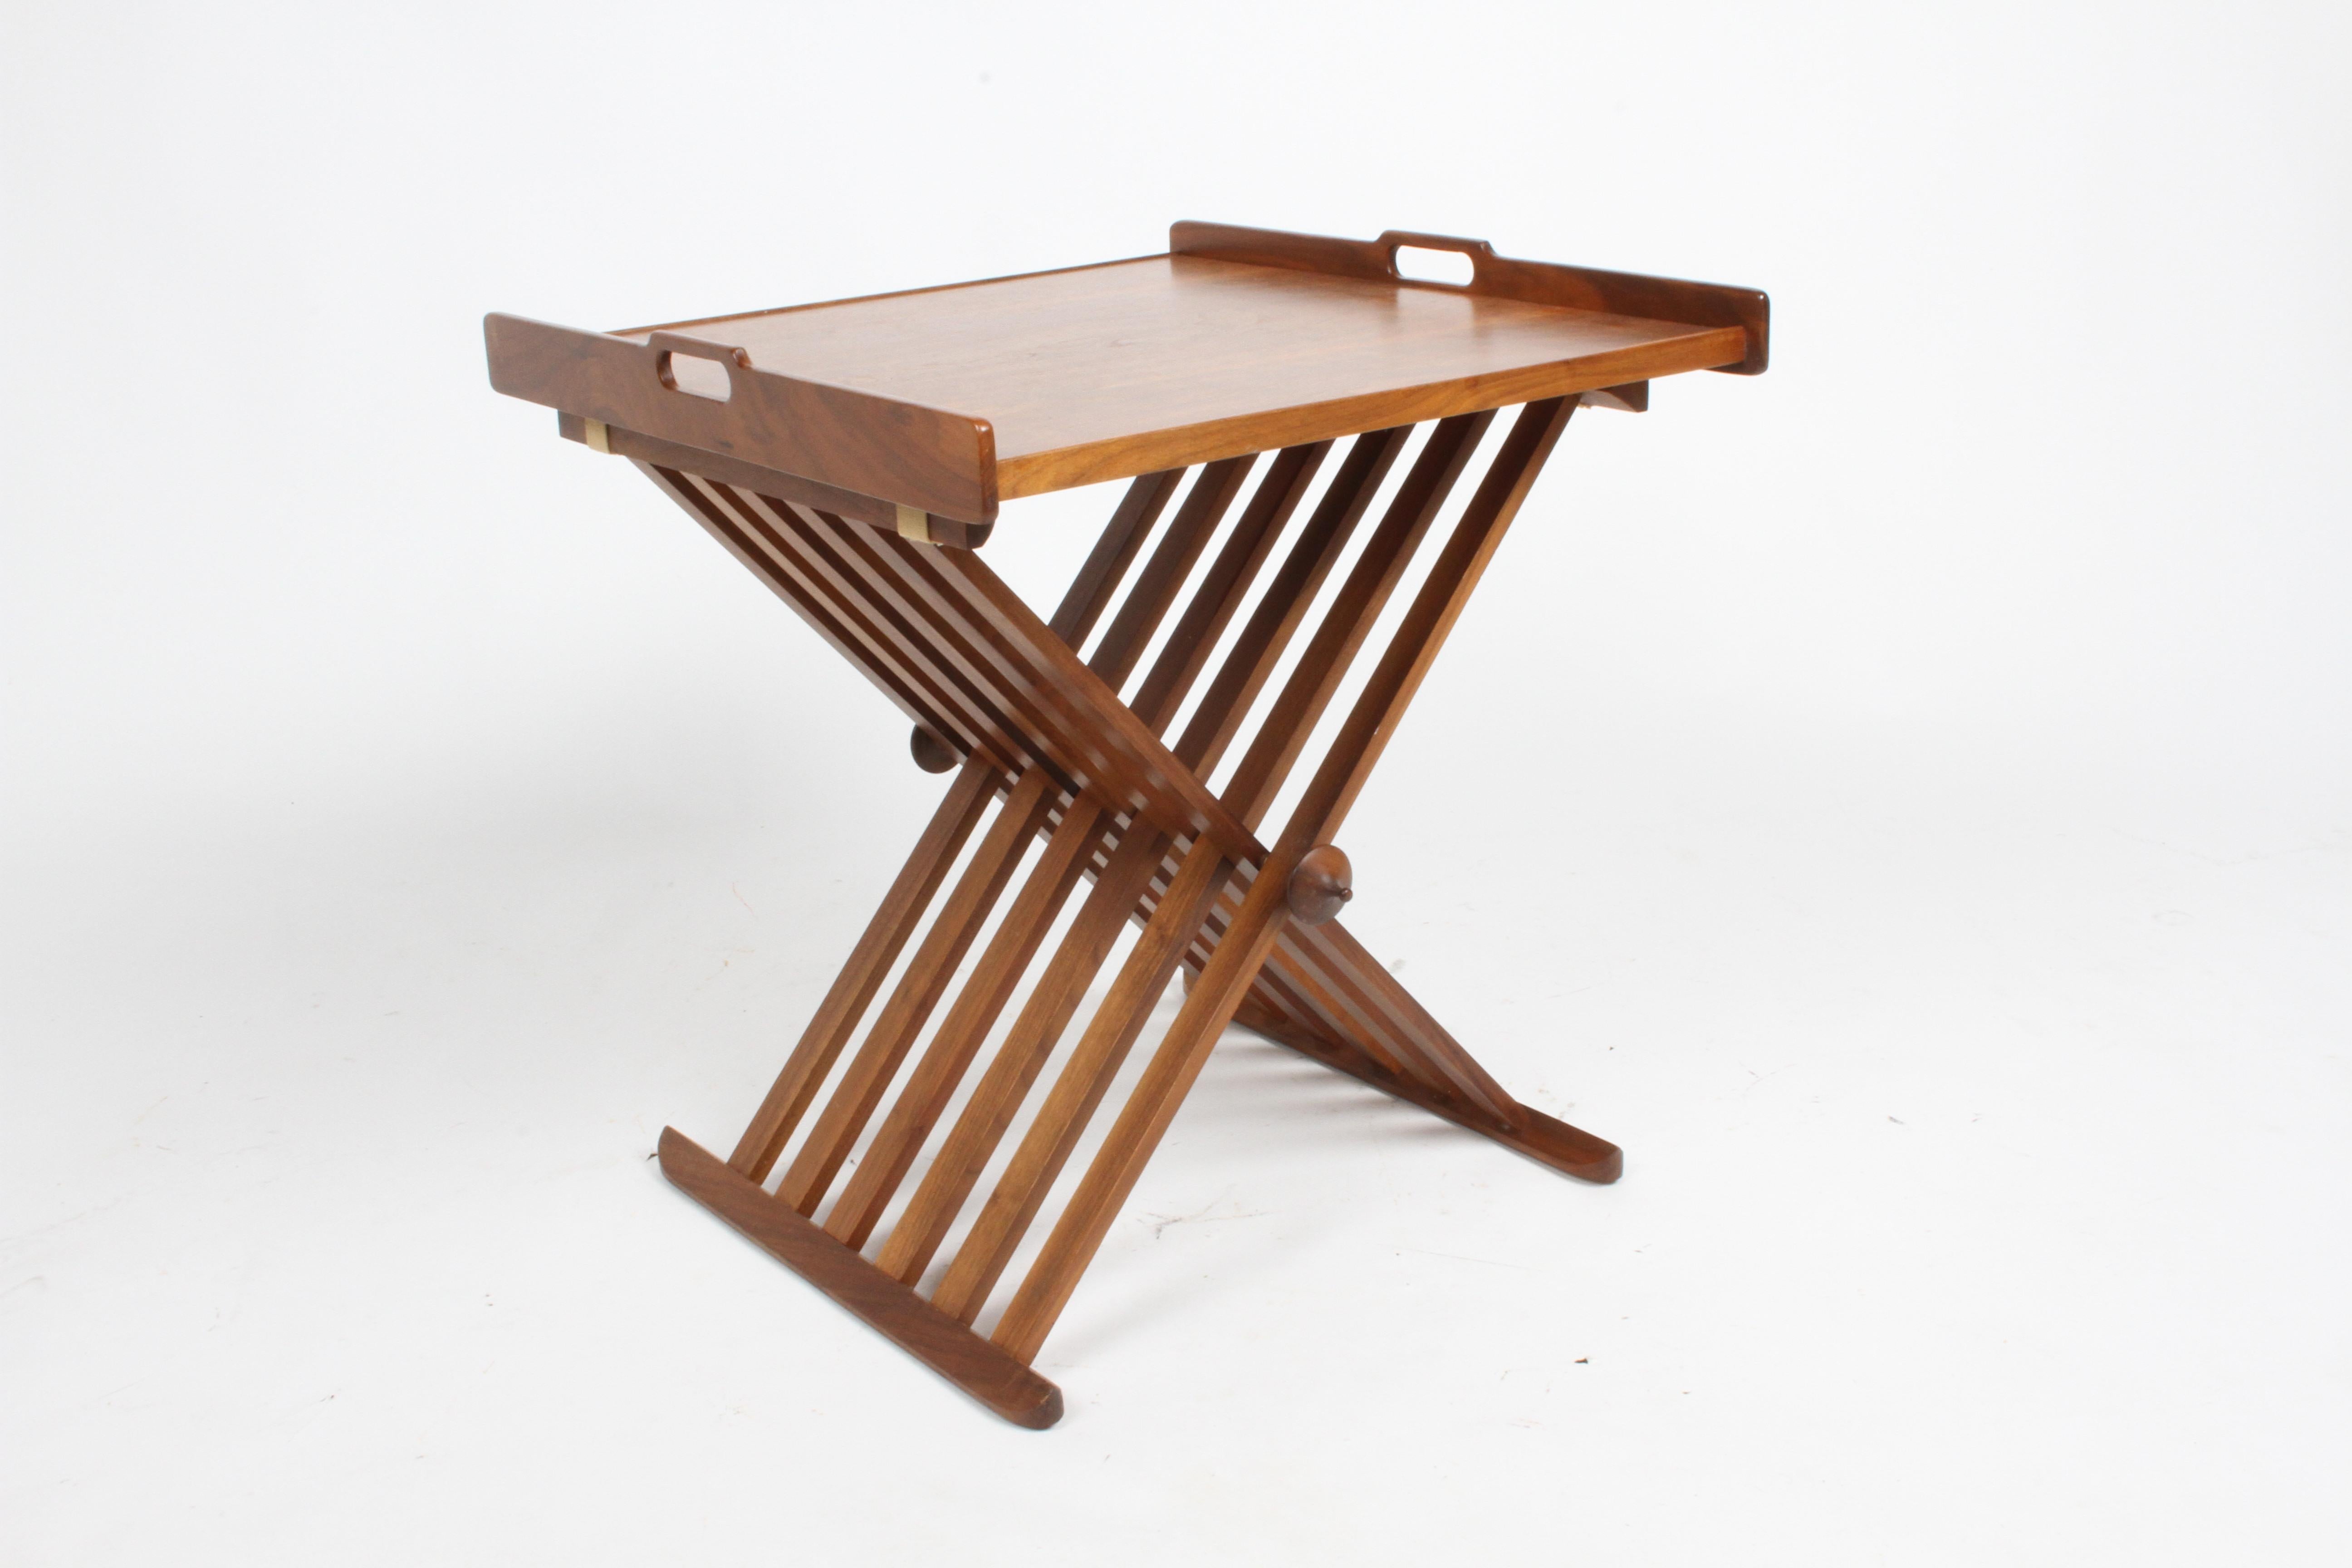 1960s Walnut Campaign Tray Table by Kipp Stewart & Stewart McDougall for Drexel  In Good Condition For Sale In St. Louis, MO